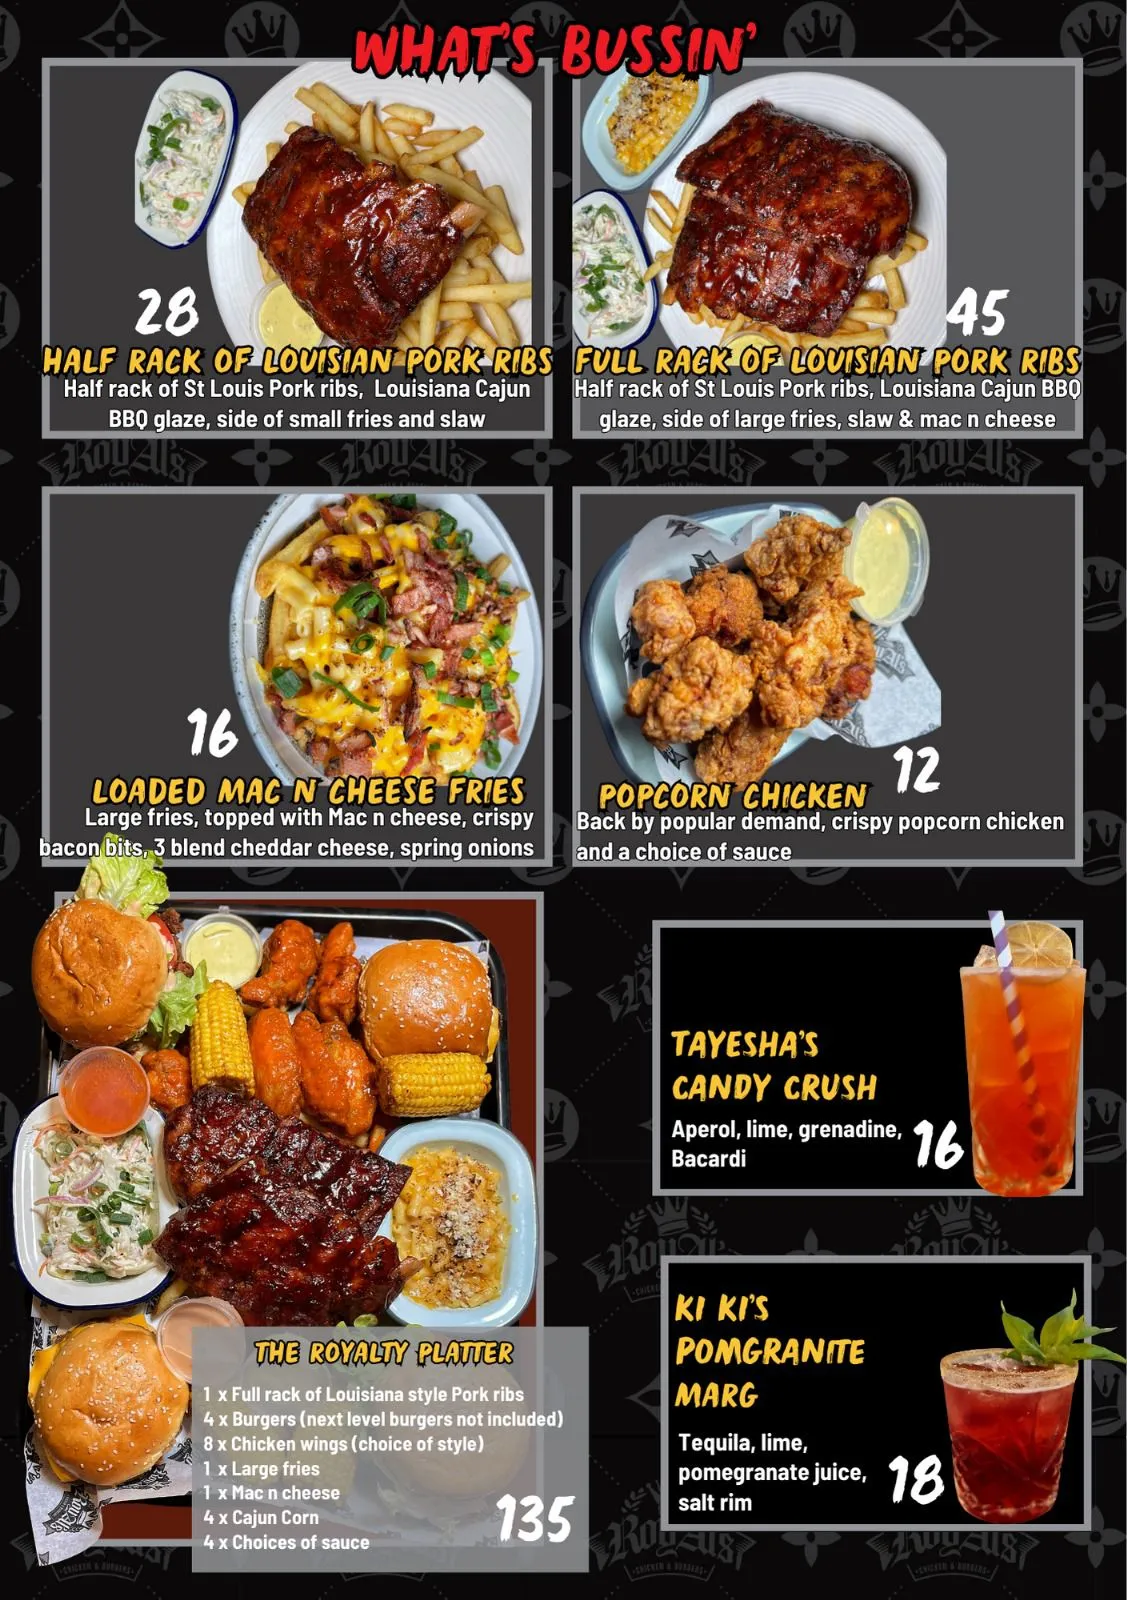 RoyAl's Chicken and Burger Newly Added Set Meals